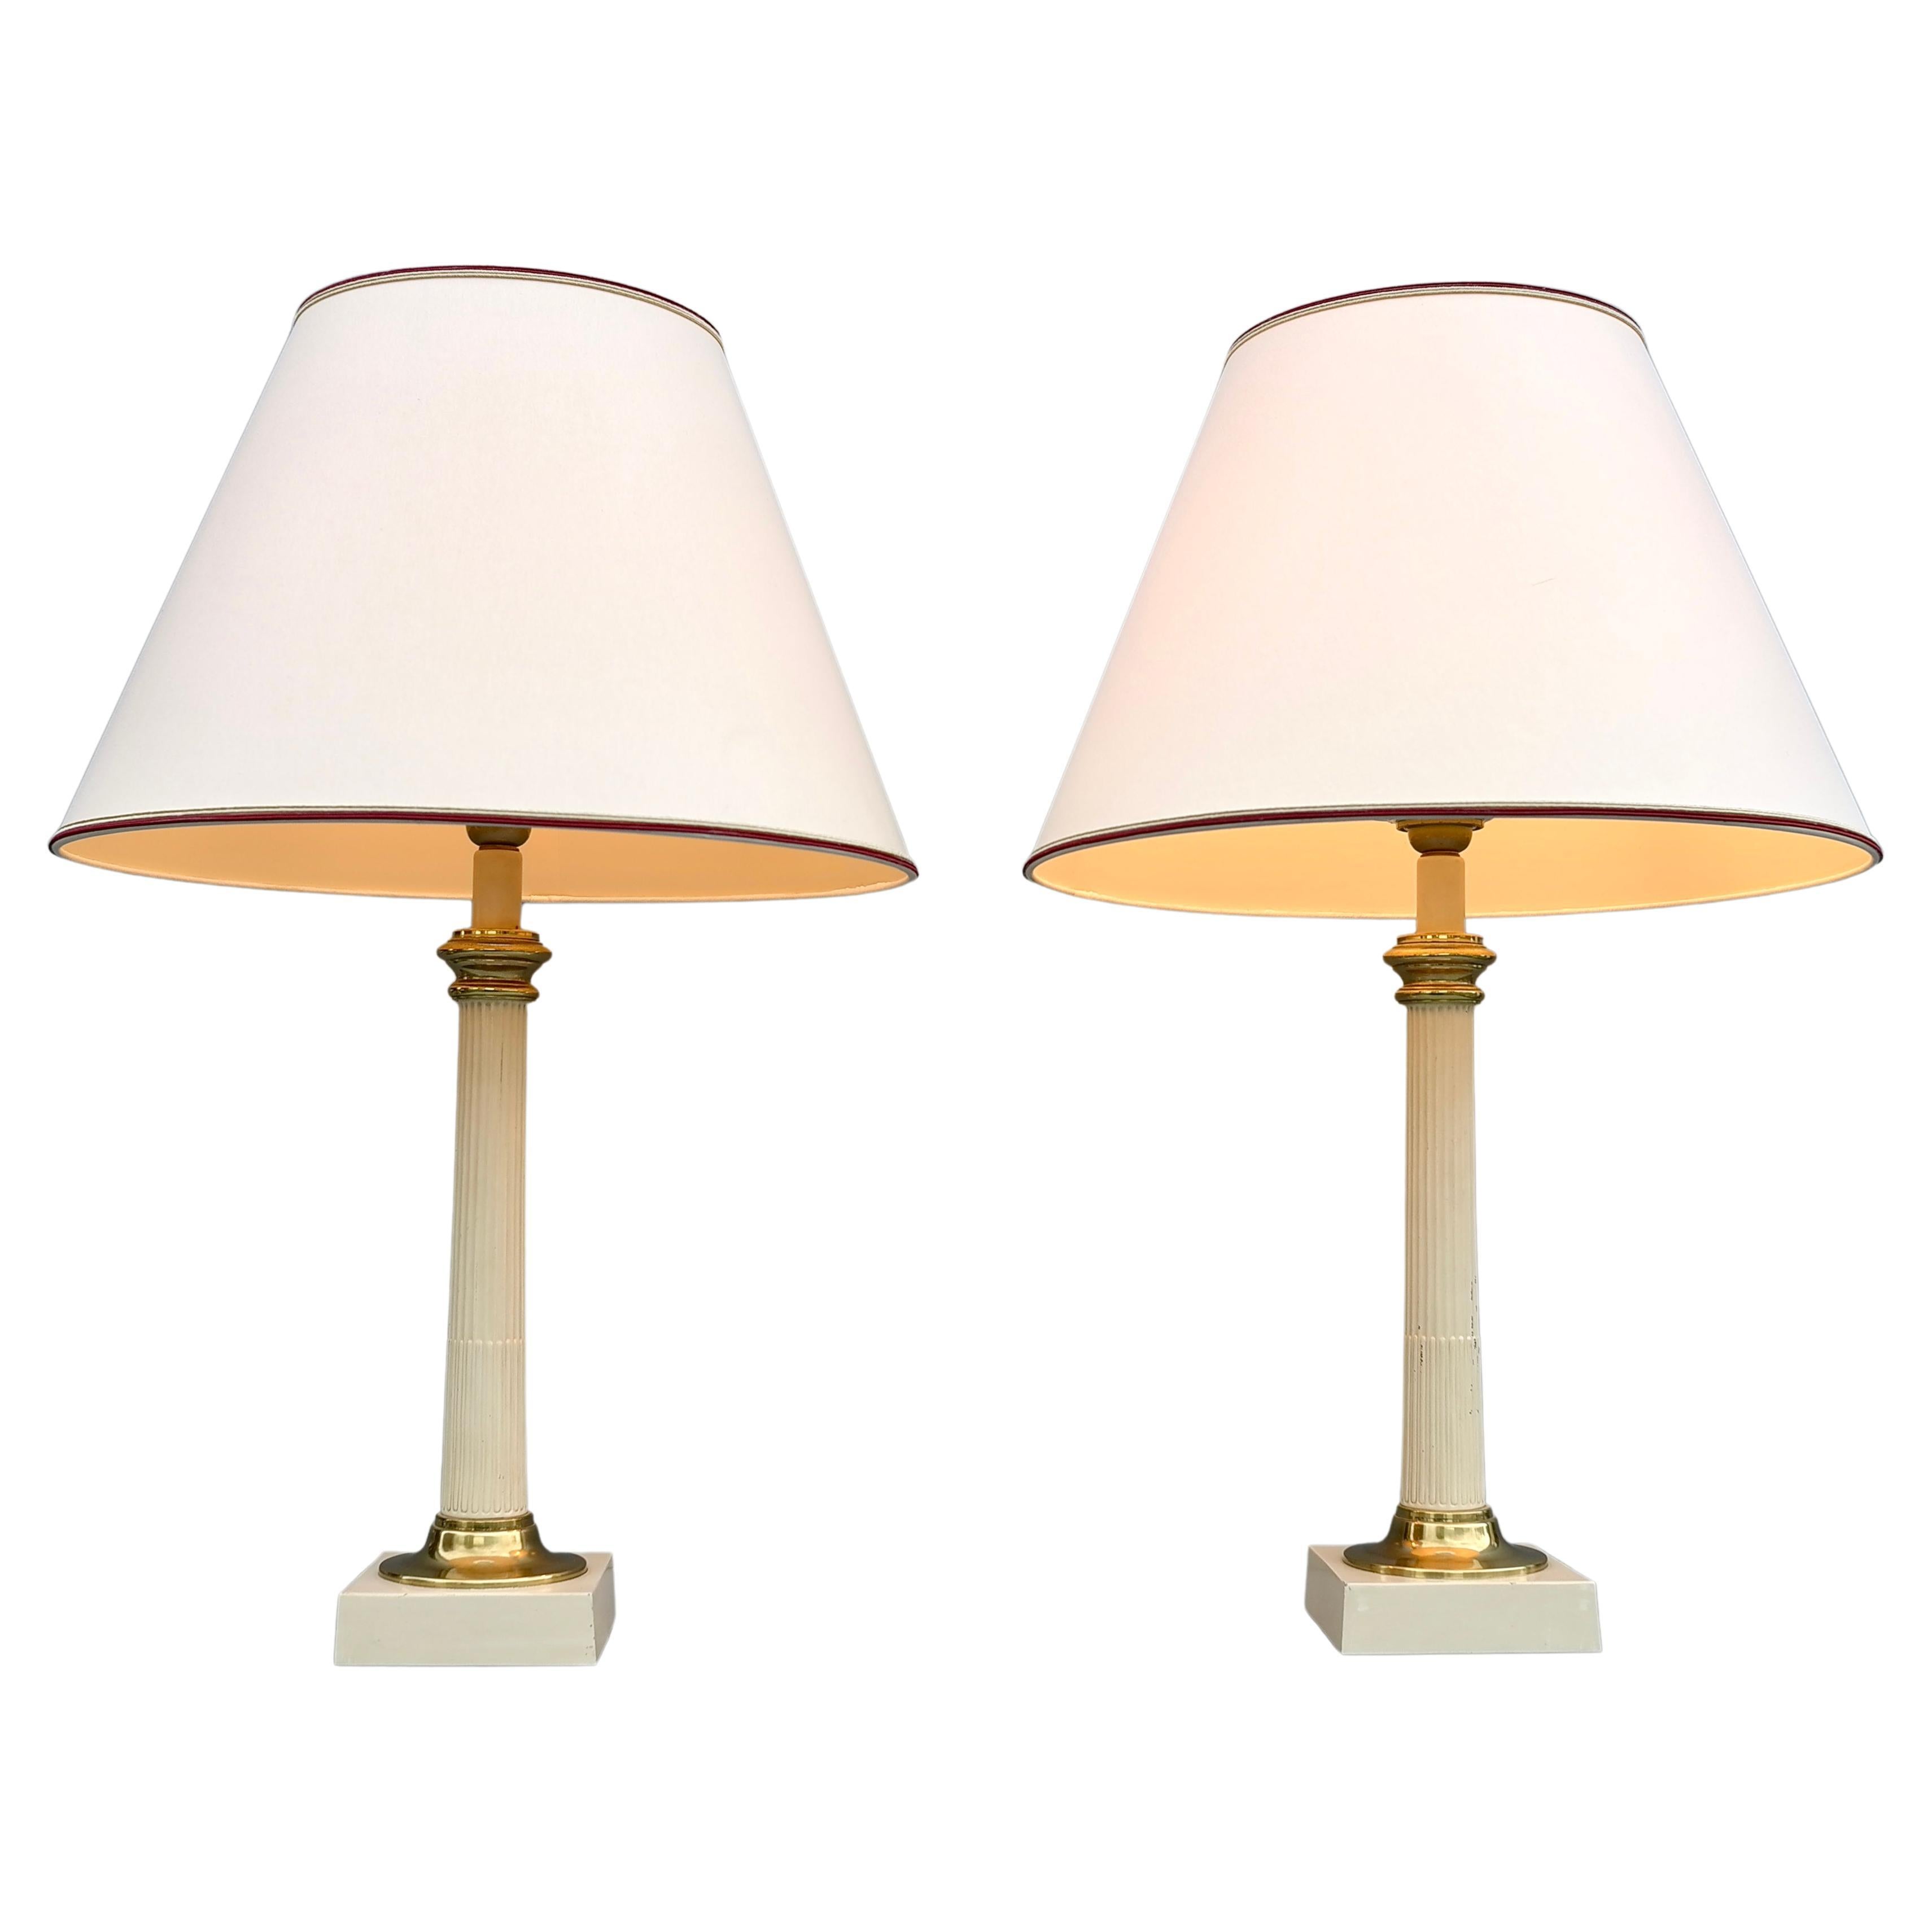 Pair of Column Table Lamps in Off White Metal and Brass Details, France  1960's For Sale at 1stDibs